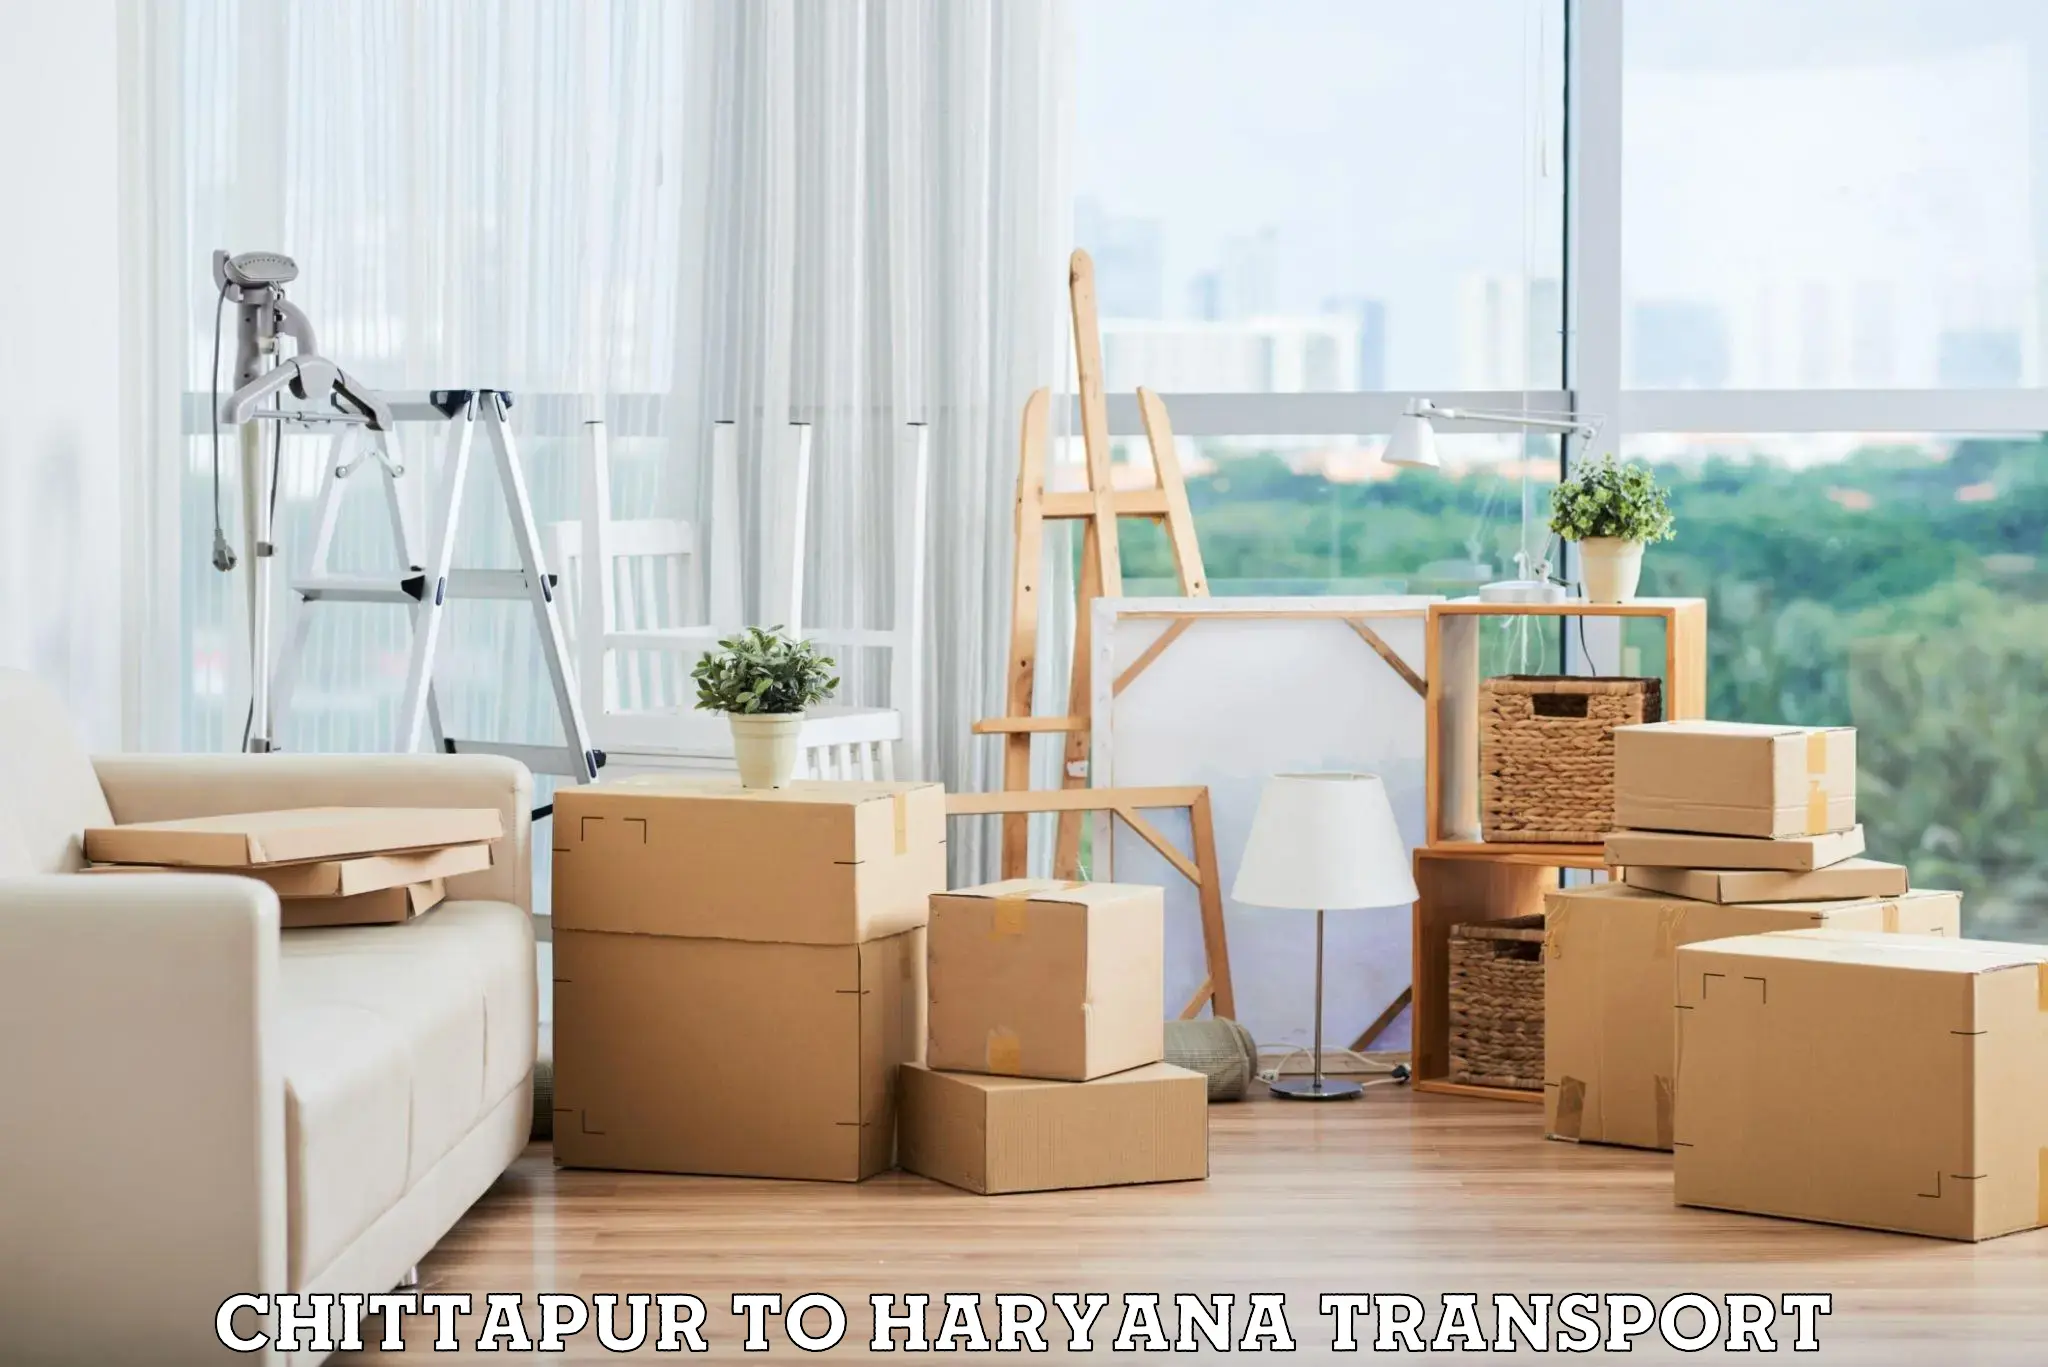 Truck transport companies in India Chittapur to Panipat